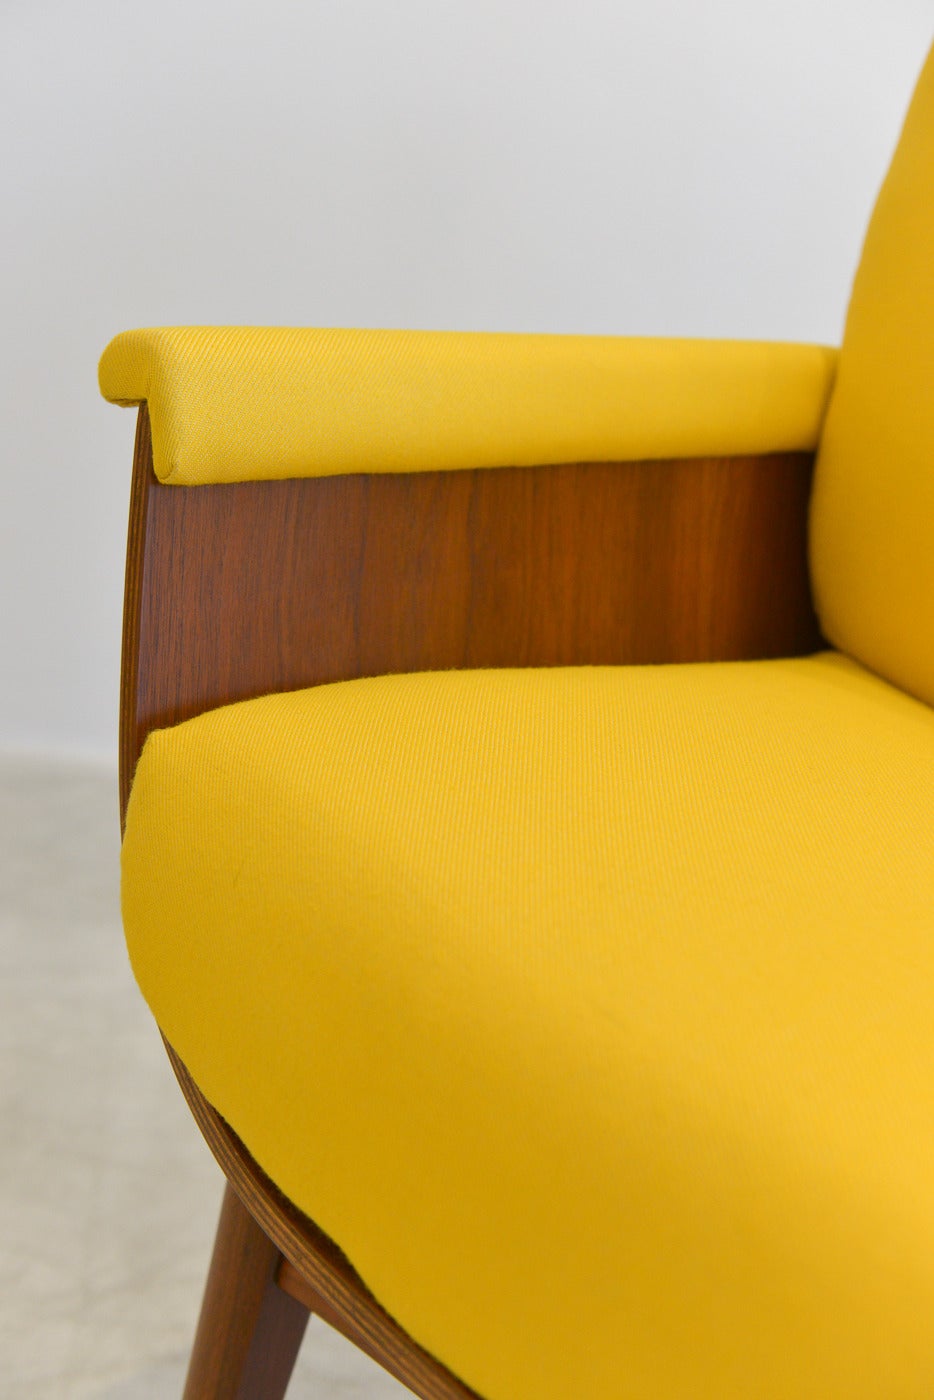 Fabric Walnut Bentwood Scoop Chair in Bright Yellow